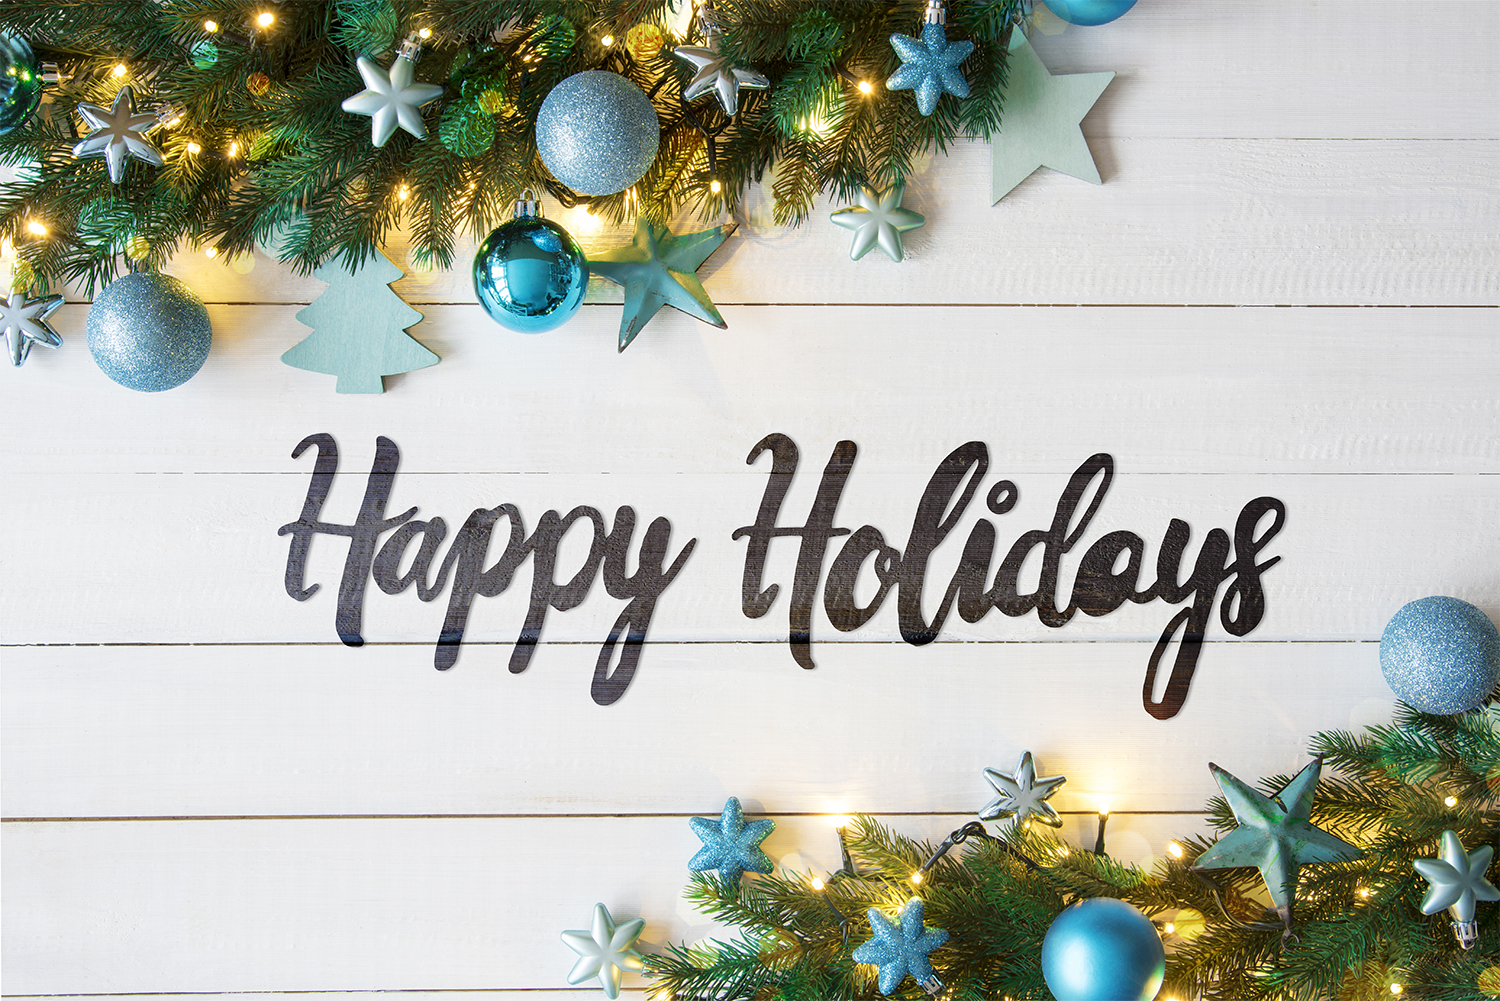 Why We Love the Holidays at LightHouse Automotive